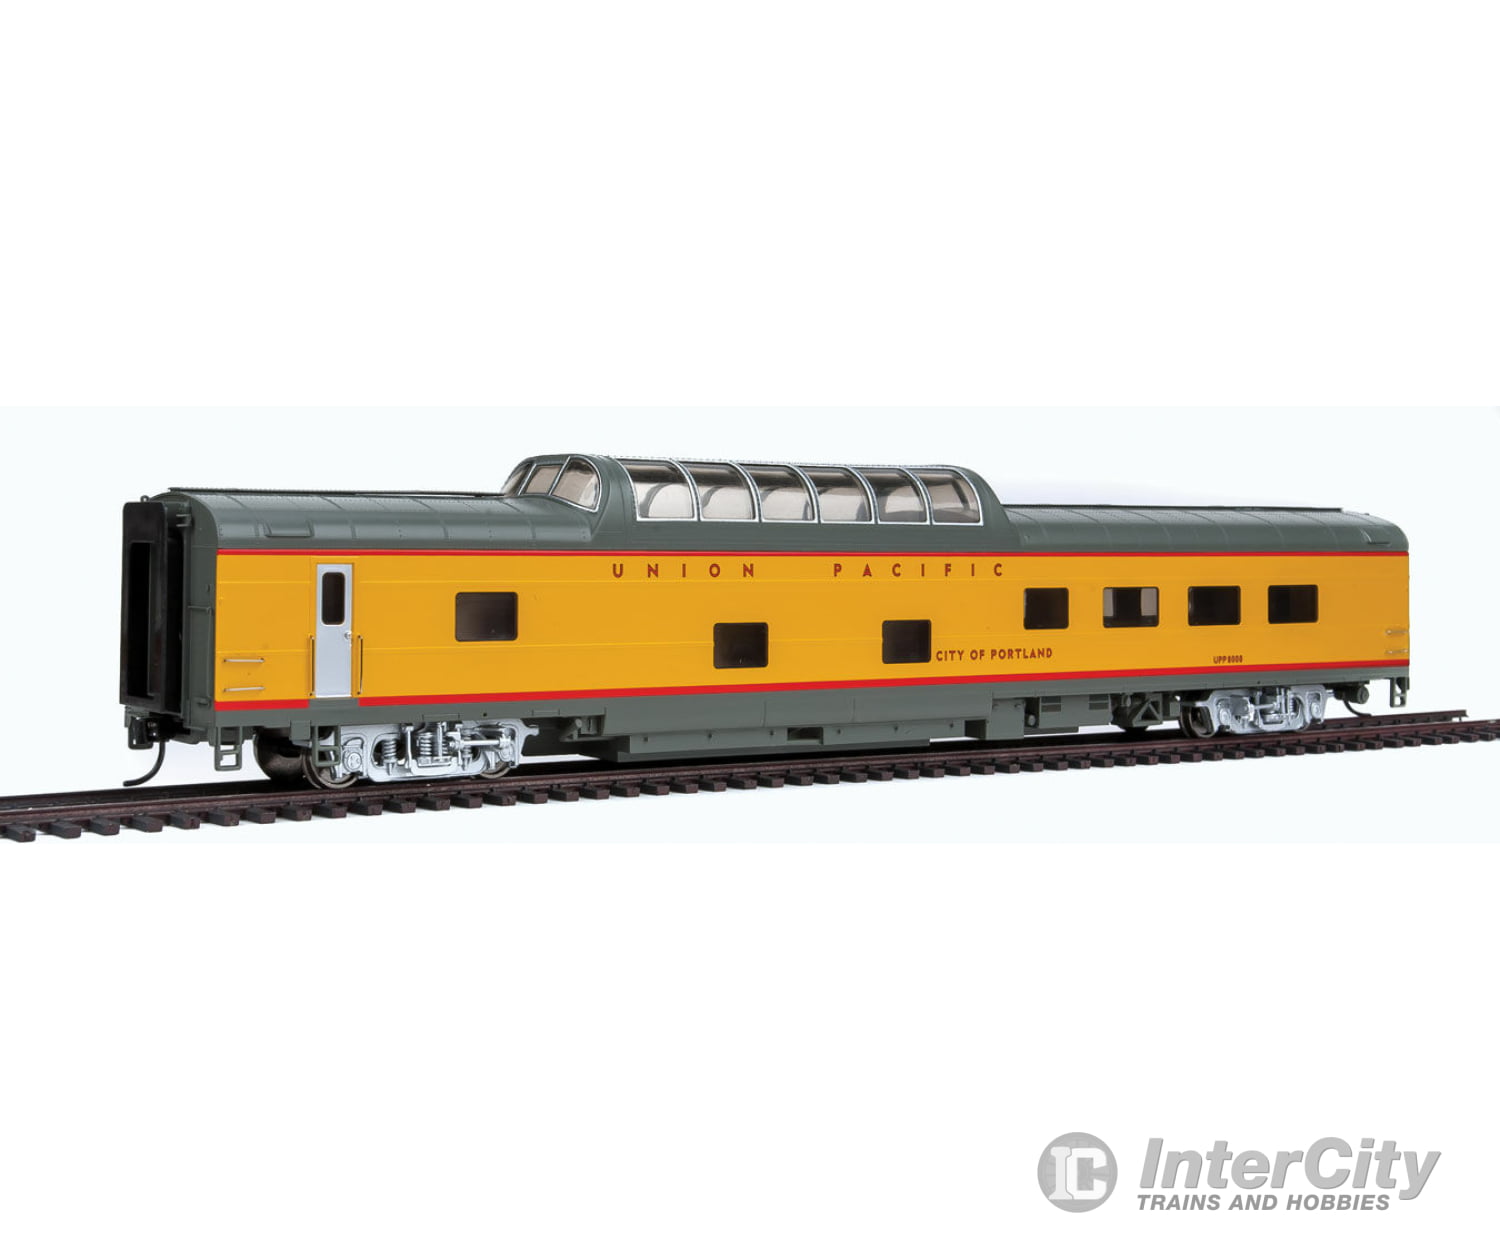 Walthers Life-Like Ho 18153 85 Acf Dome Diner - Standard Union Pacific(R) Heritage Series -- City Of